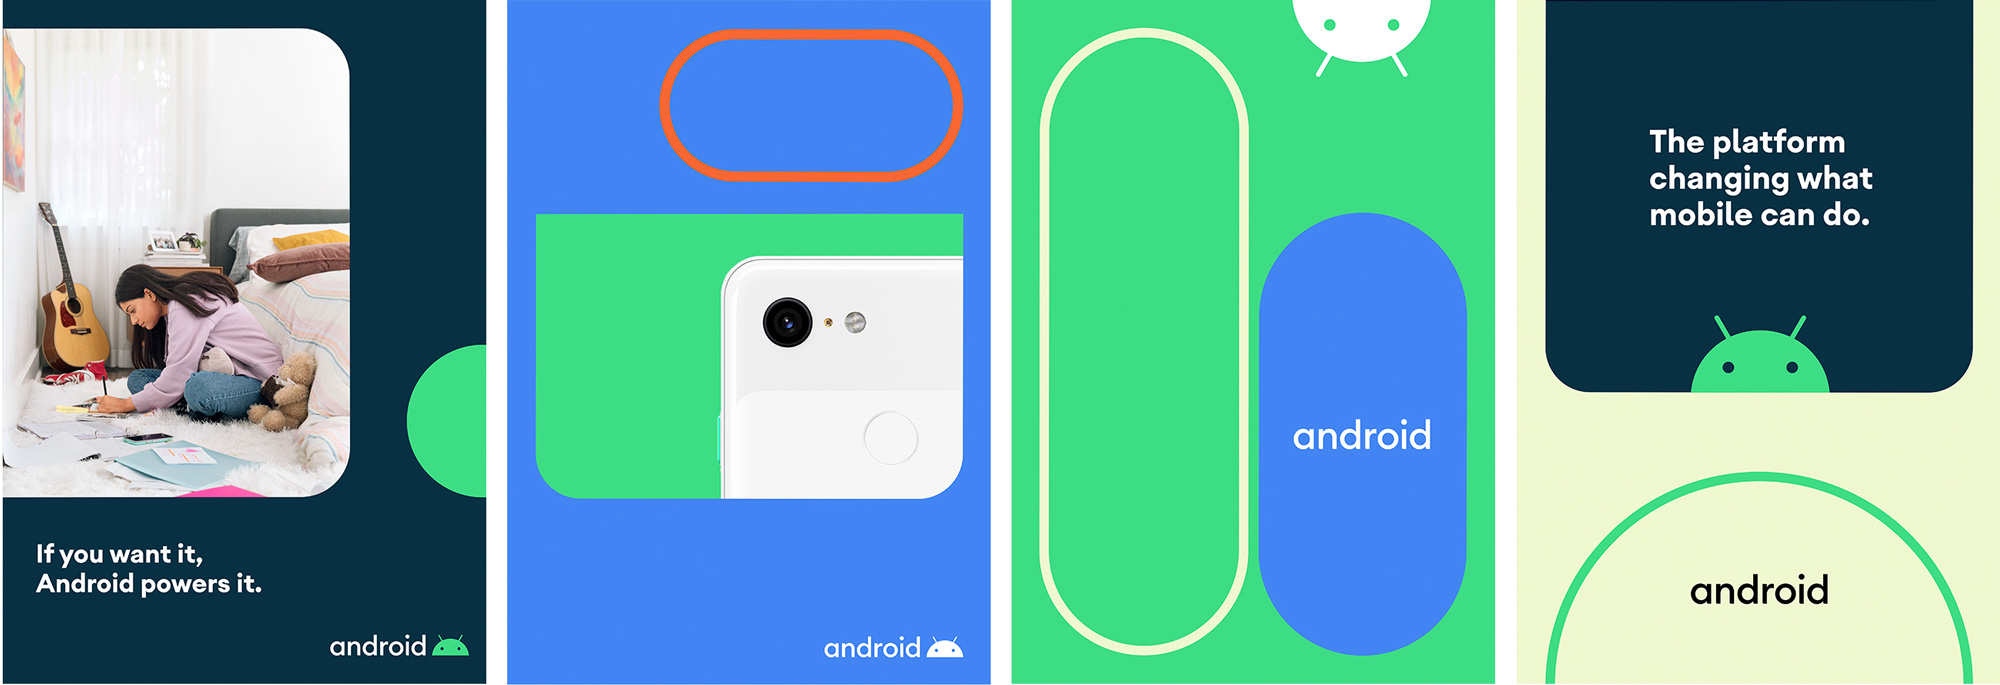 New Logo and Identity for Android by Huge